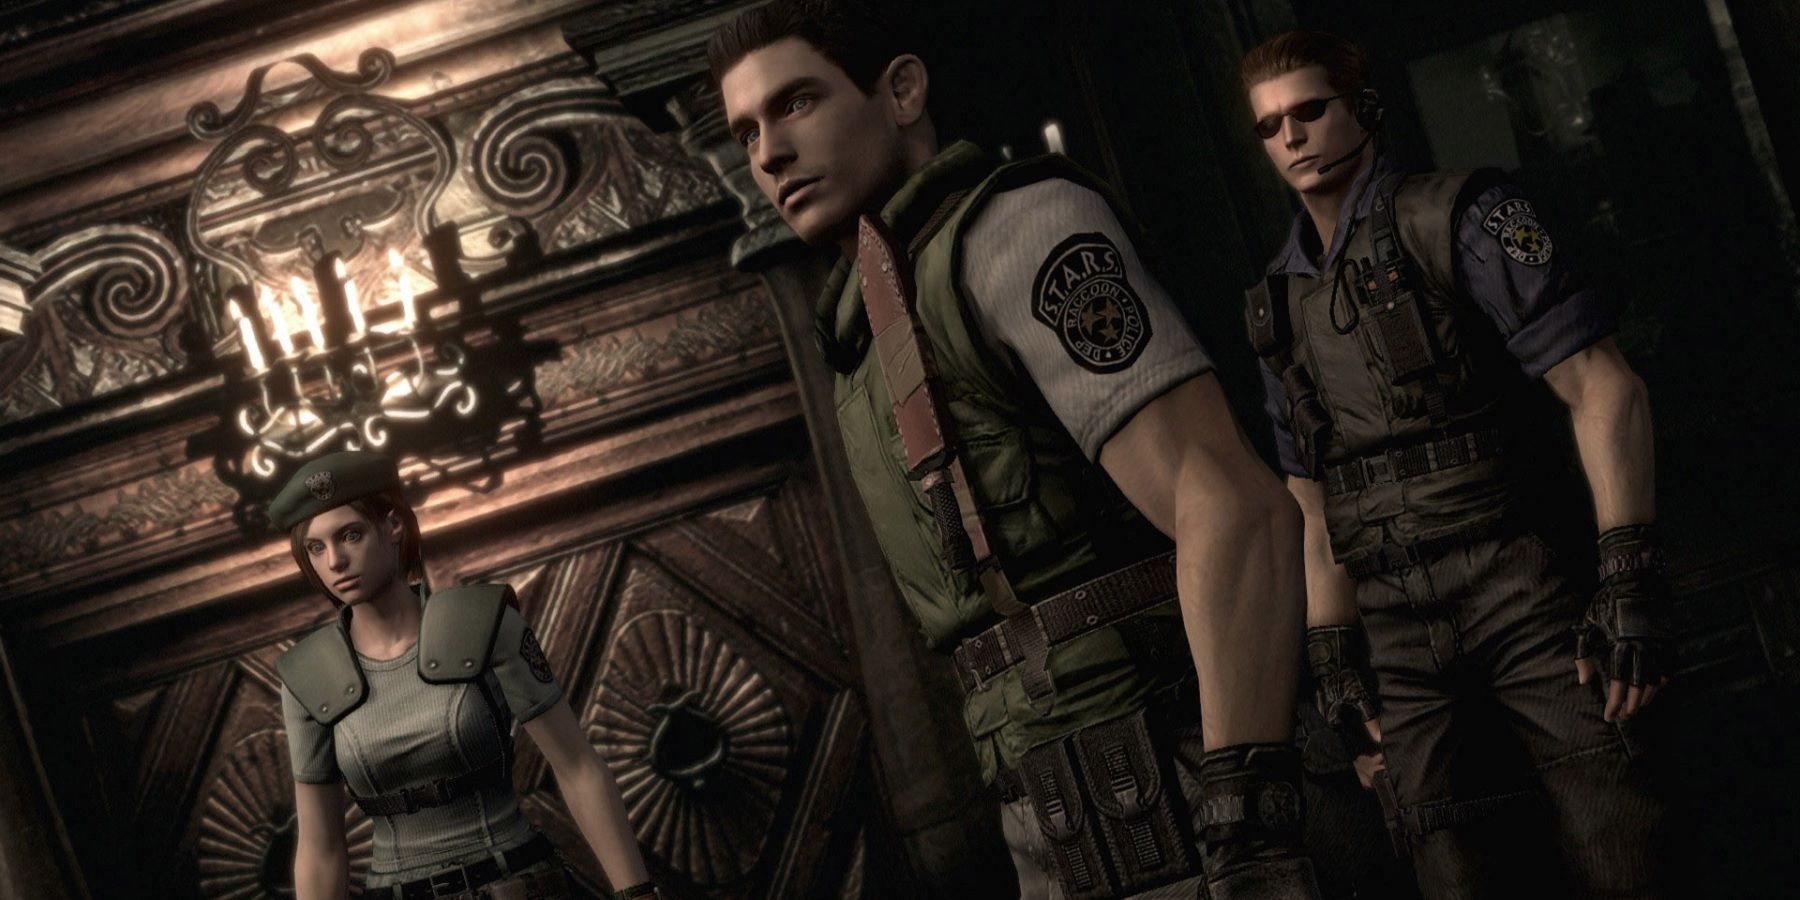 Get 11 Resident Evil Games for $35 at Humble Bundle - FullCleared